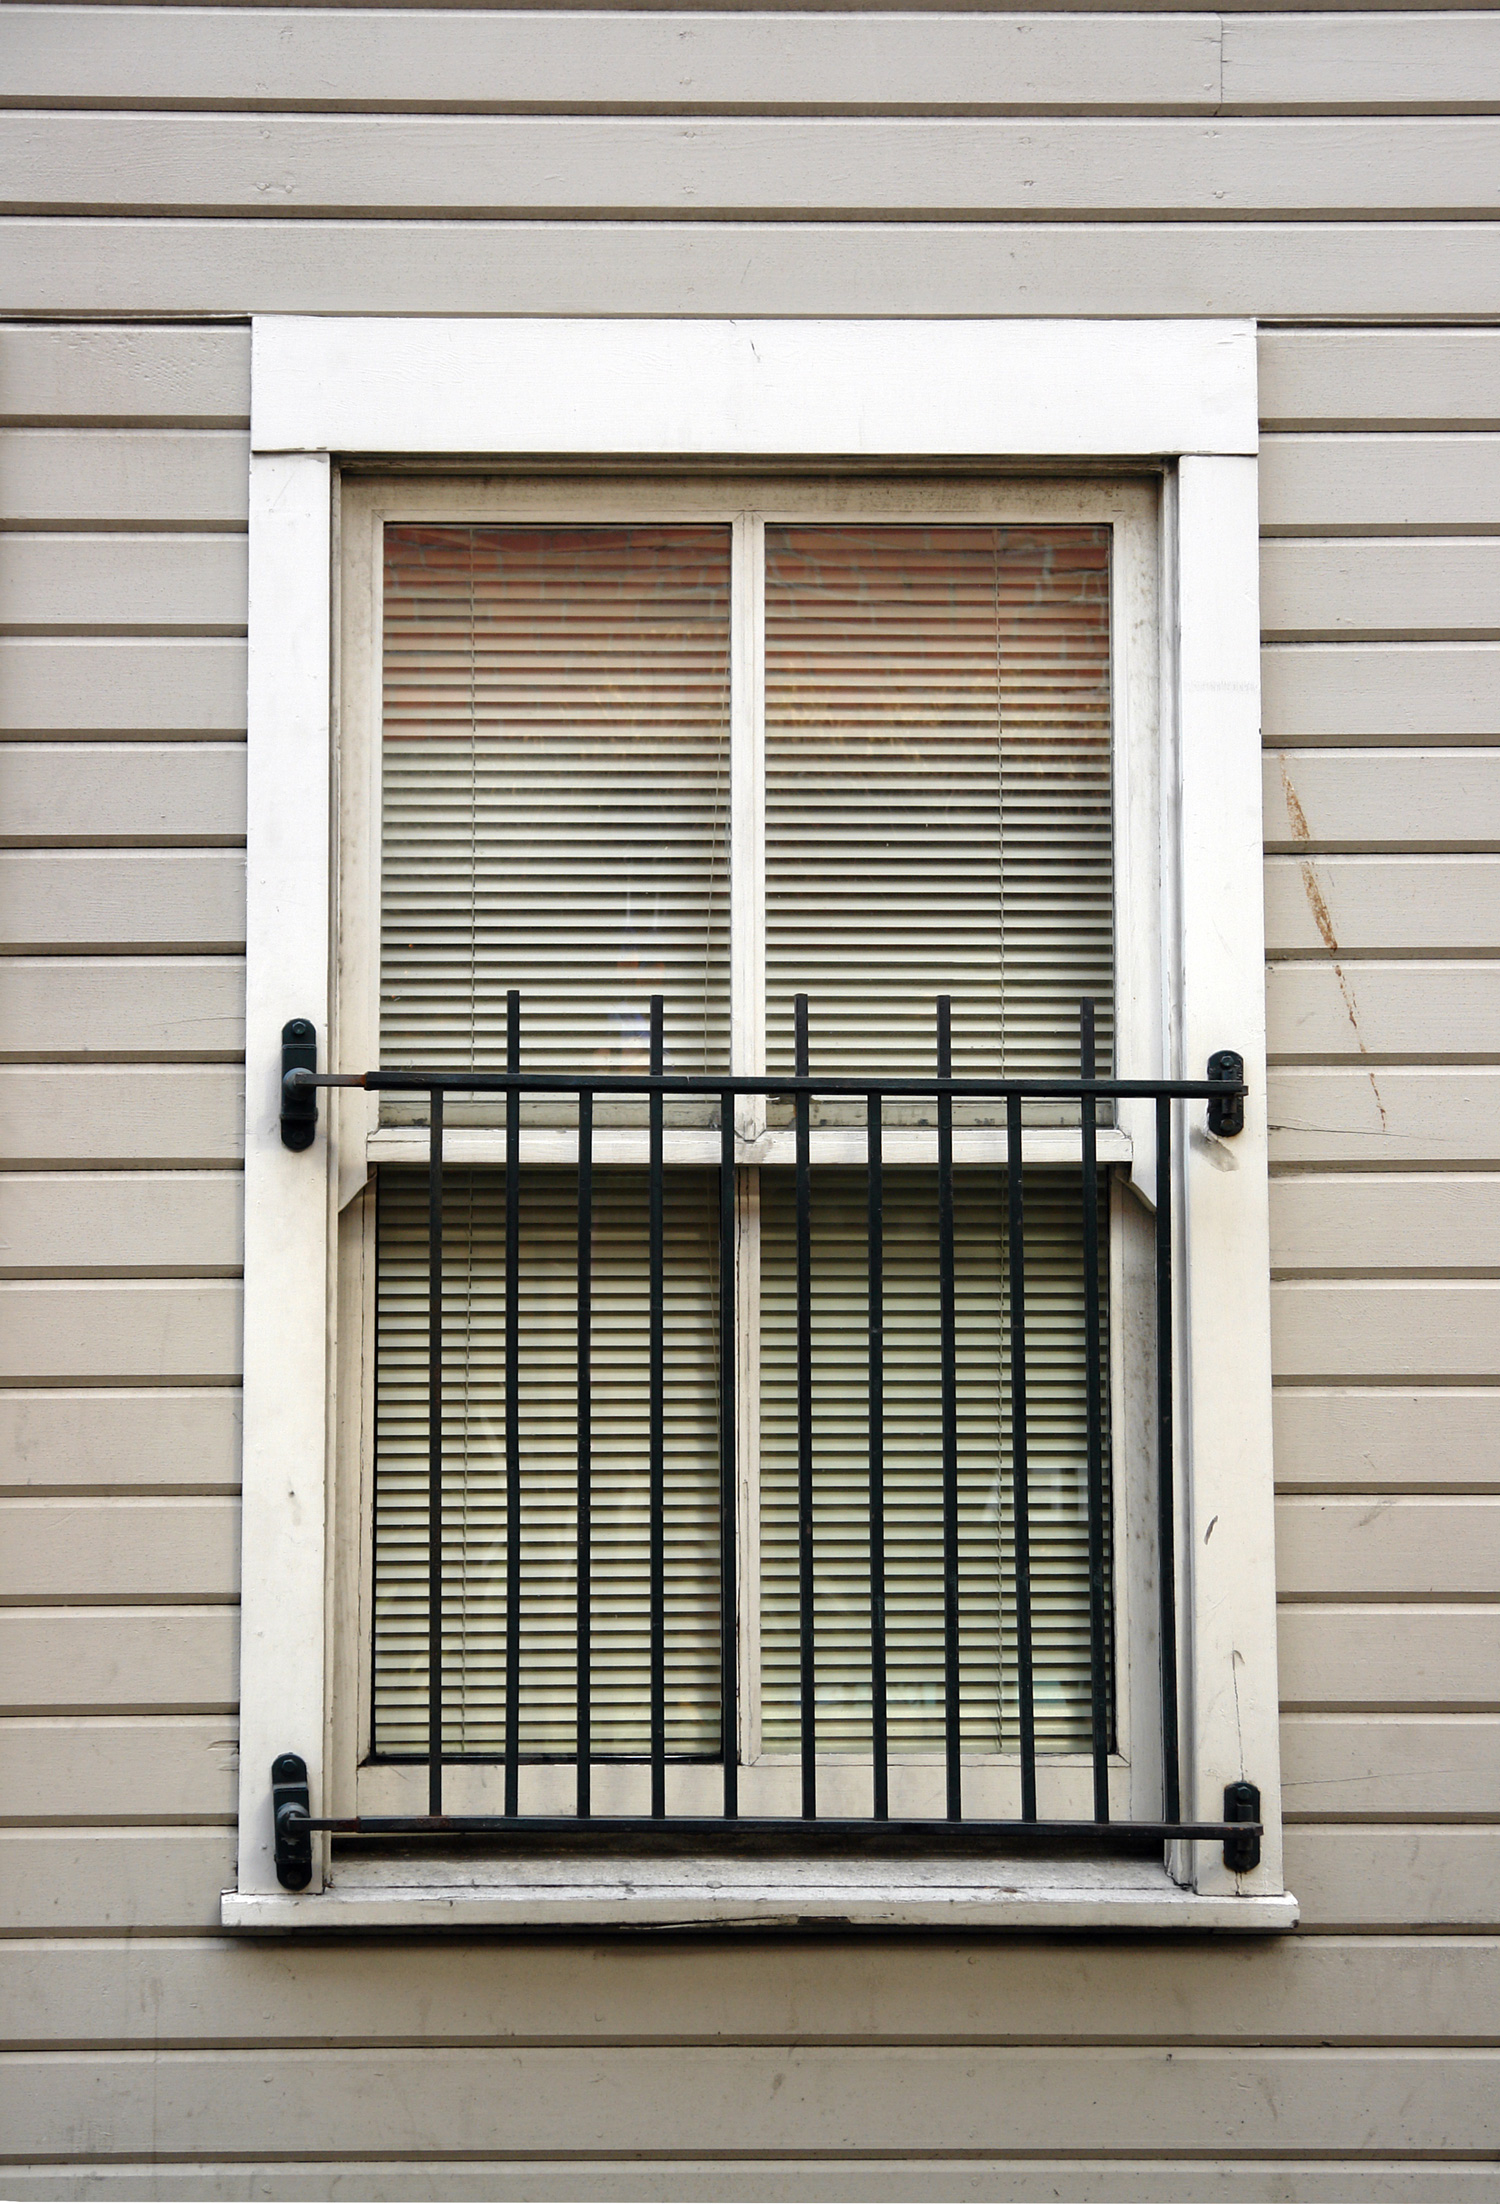 A double-hung window with a wrought-iron grate looks upon an urban alley.